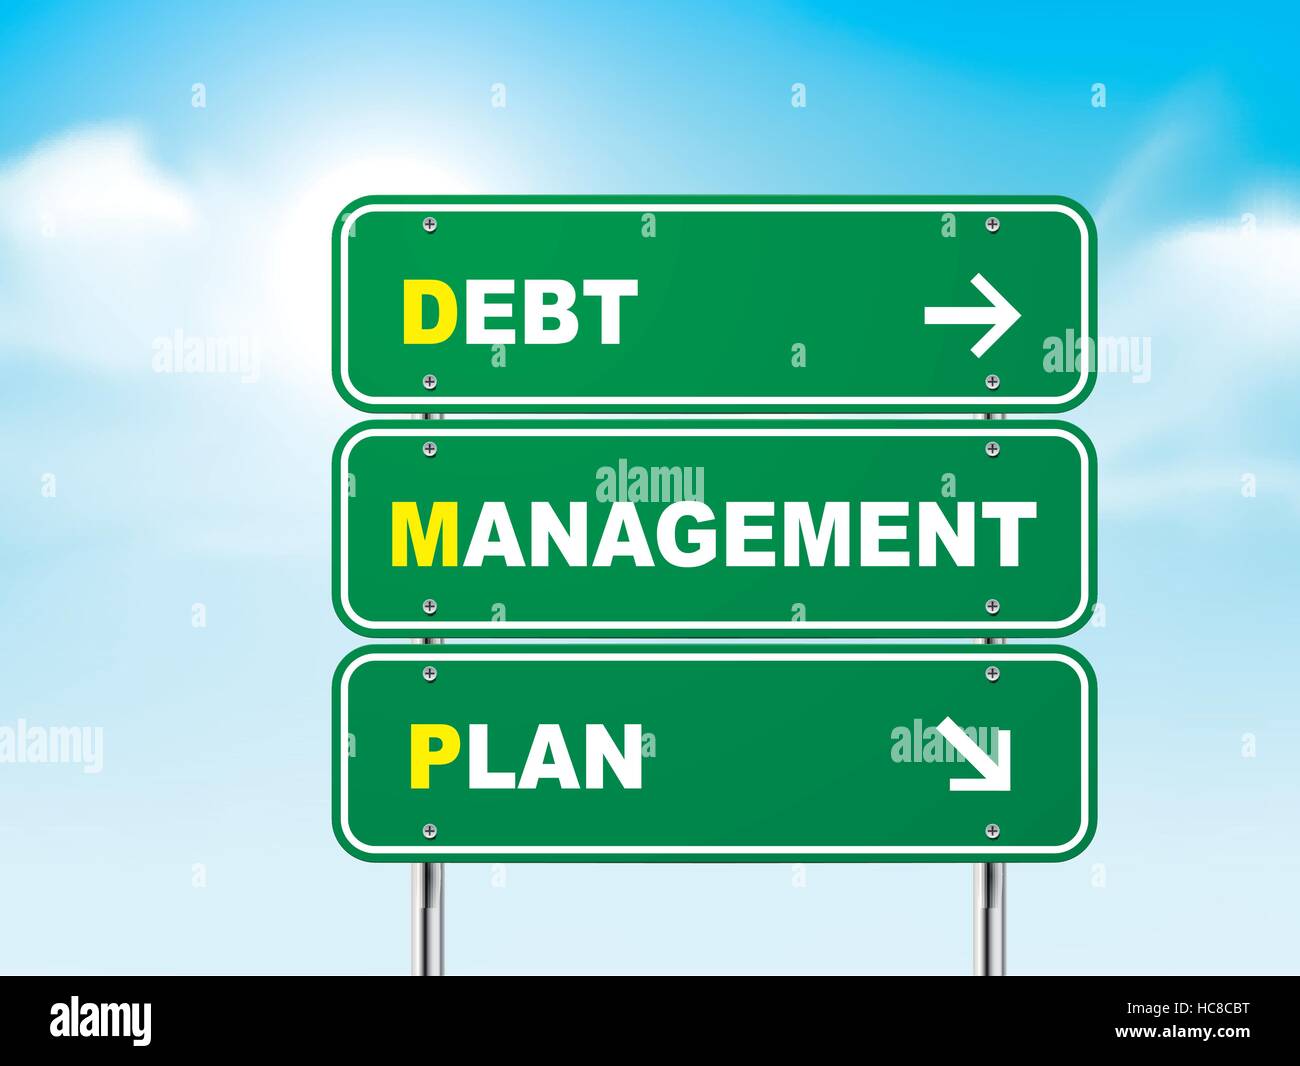 3d debt management plan road sign isolated on blue background Stock Vector